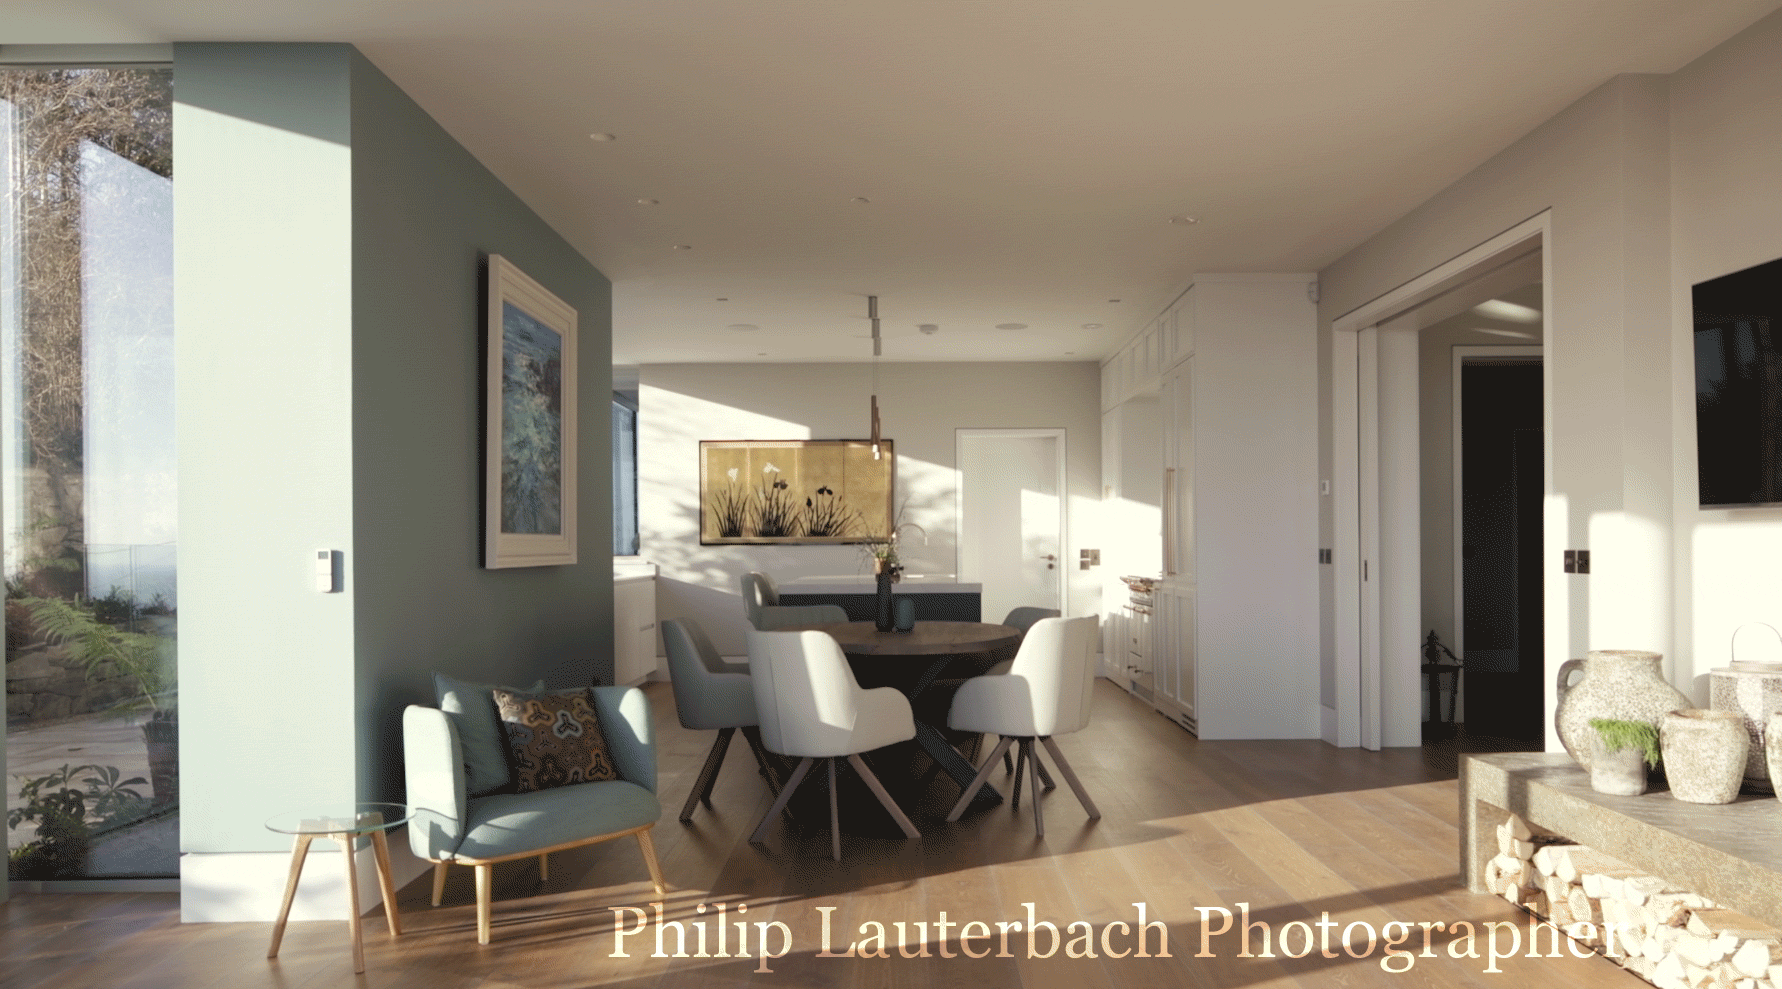 Interior architectural photography